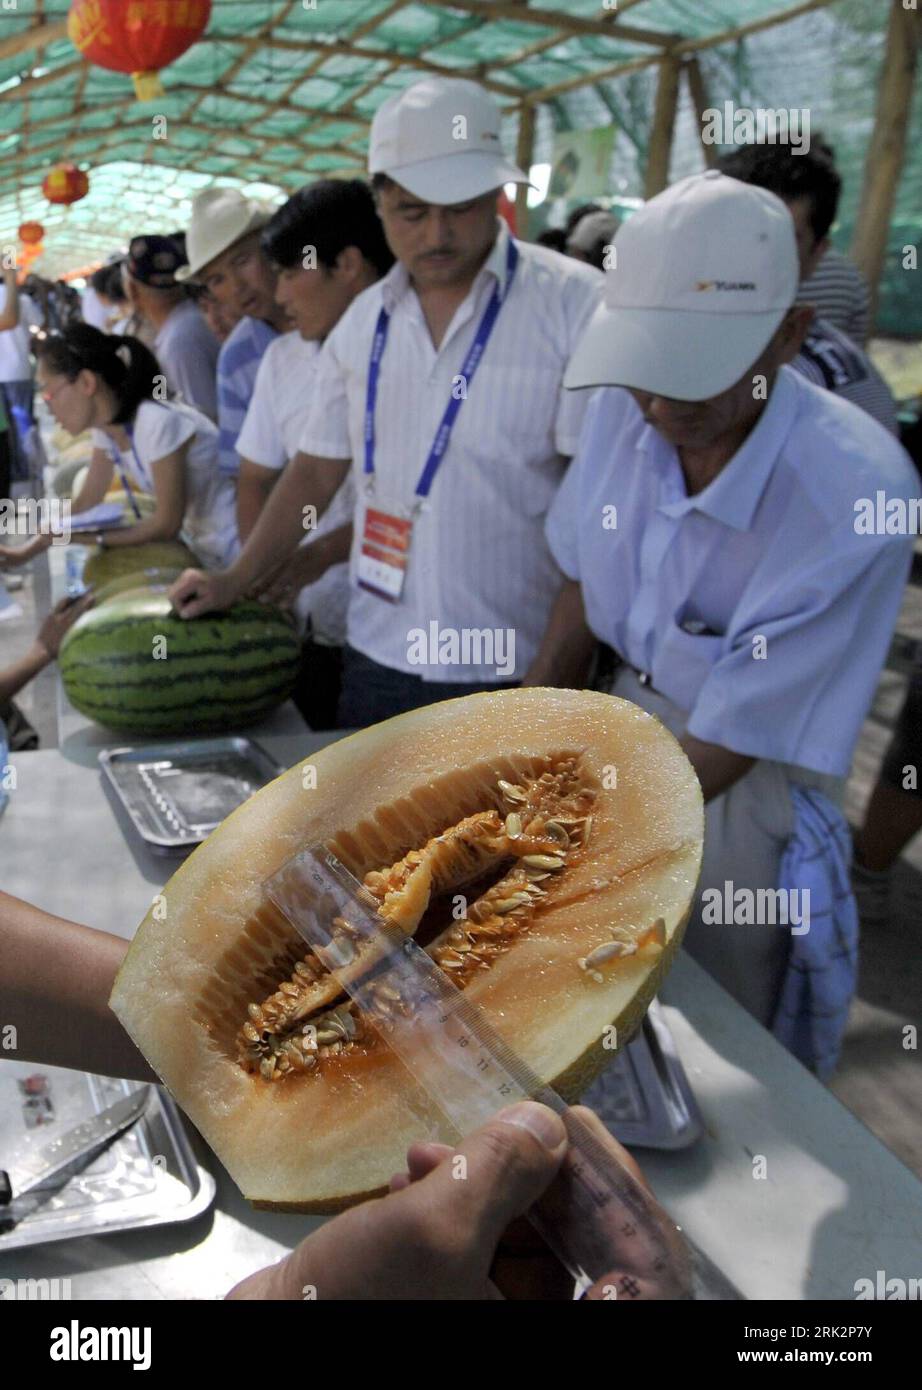 Bildnummer: 53231587  Datum: 29.07.2009  Copyright: imago/Xinhua (090729) -- HAMI(XINJIANG), July 29, 2009 (Xinhua) -- A judge measures a hami melon in a melon contest held in Hami City, northwest China s Xinjiang Uygur Autonomous Region, July 29, 2009. Farmers from all over the city brought their harvests of hami melons, water melons and musk melons to attend the 6th melon contest in Hami on Wednesday, which attracted a great deal of visitors from home and abroad.     (Xinhua/Shen Qiao) (lyi) (3)CHINA-HAMI-MELON-CONTEST (CN)  PUBLICATIONxNOTxINxCHN  Melonen Wettbewerb Melonenwettbewerb kbdig Stock Photo